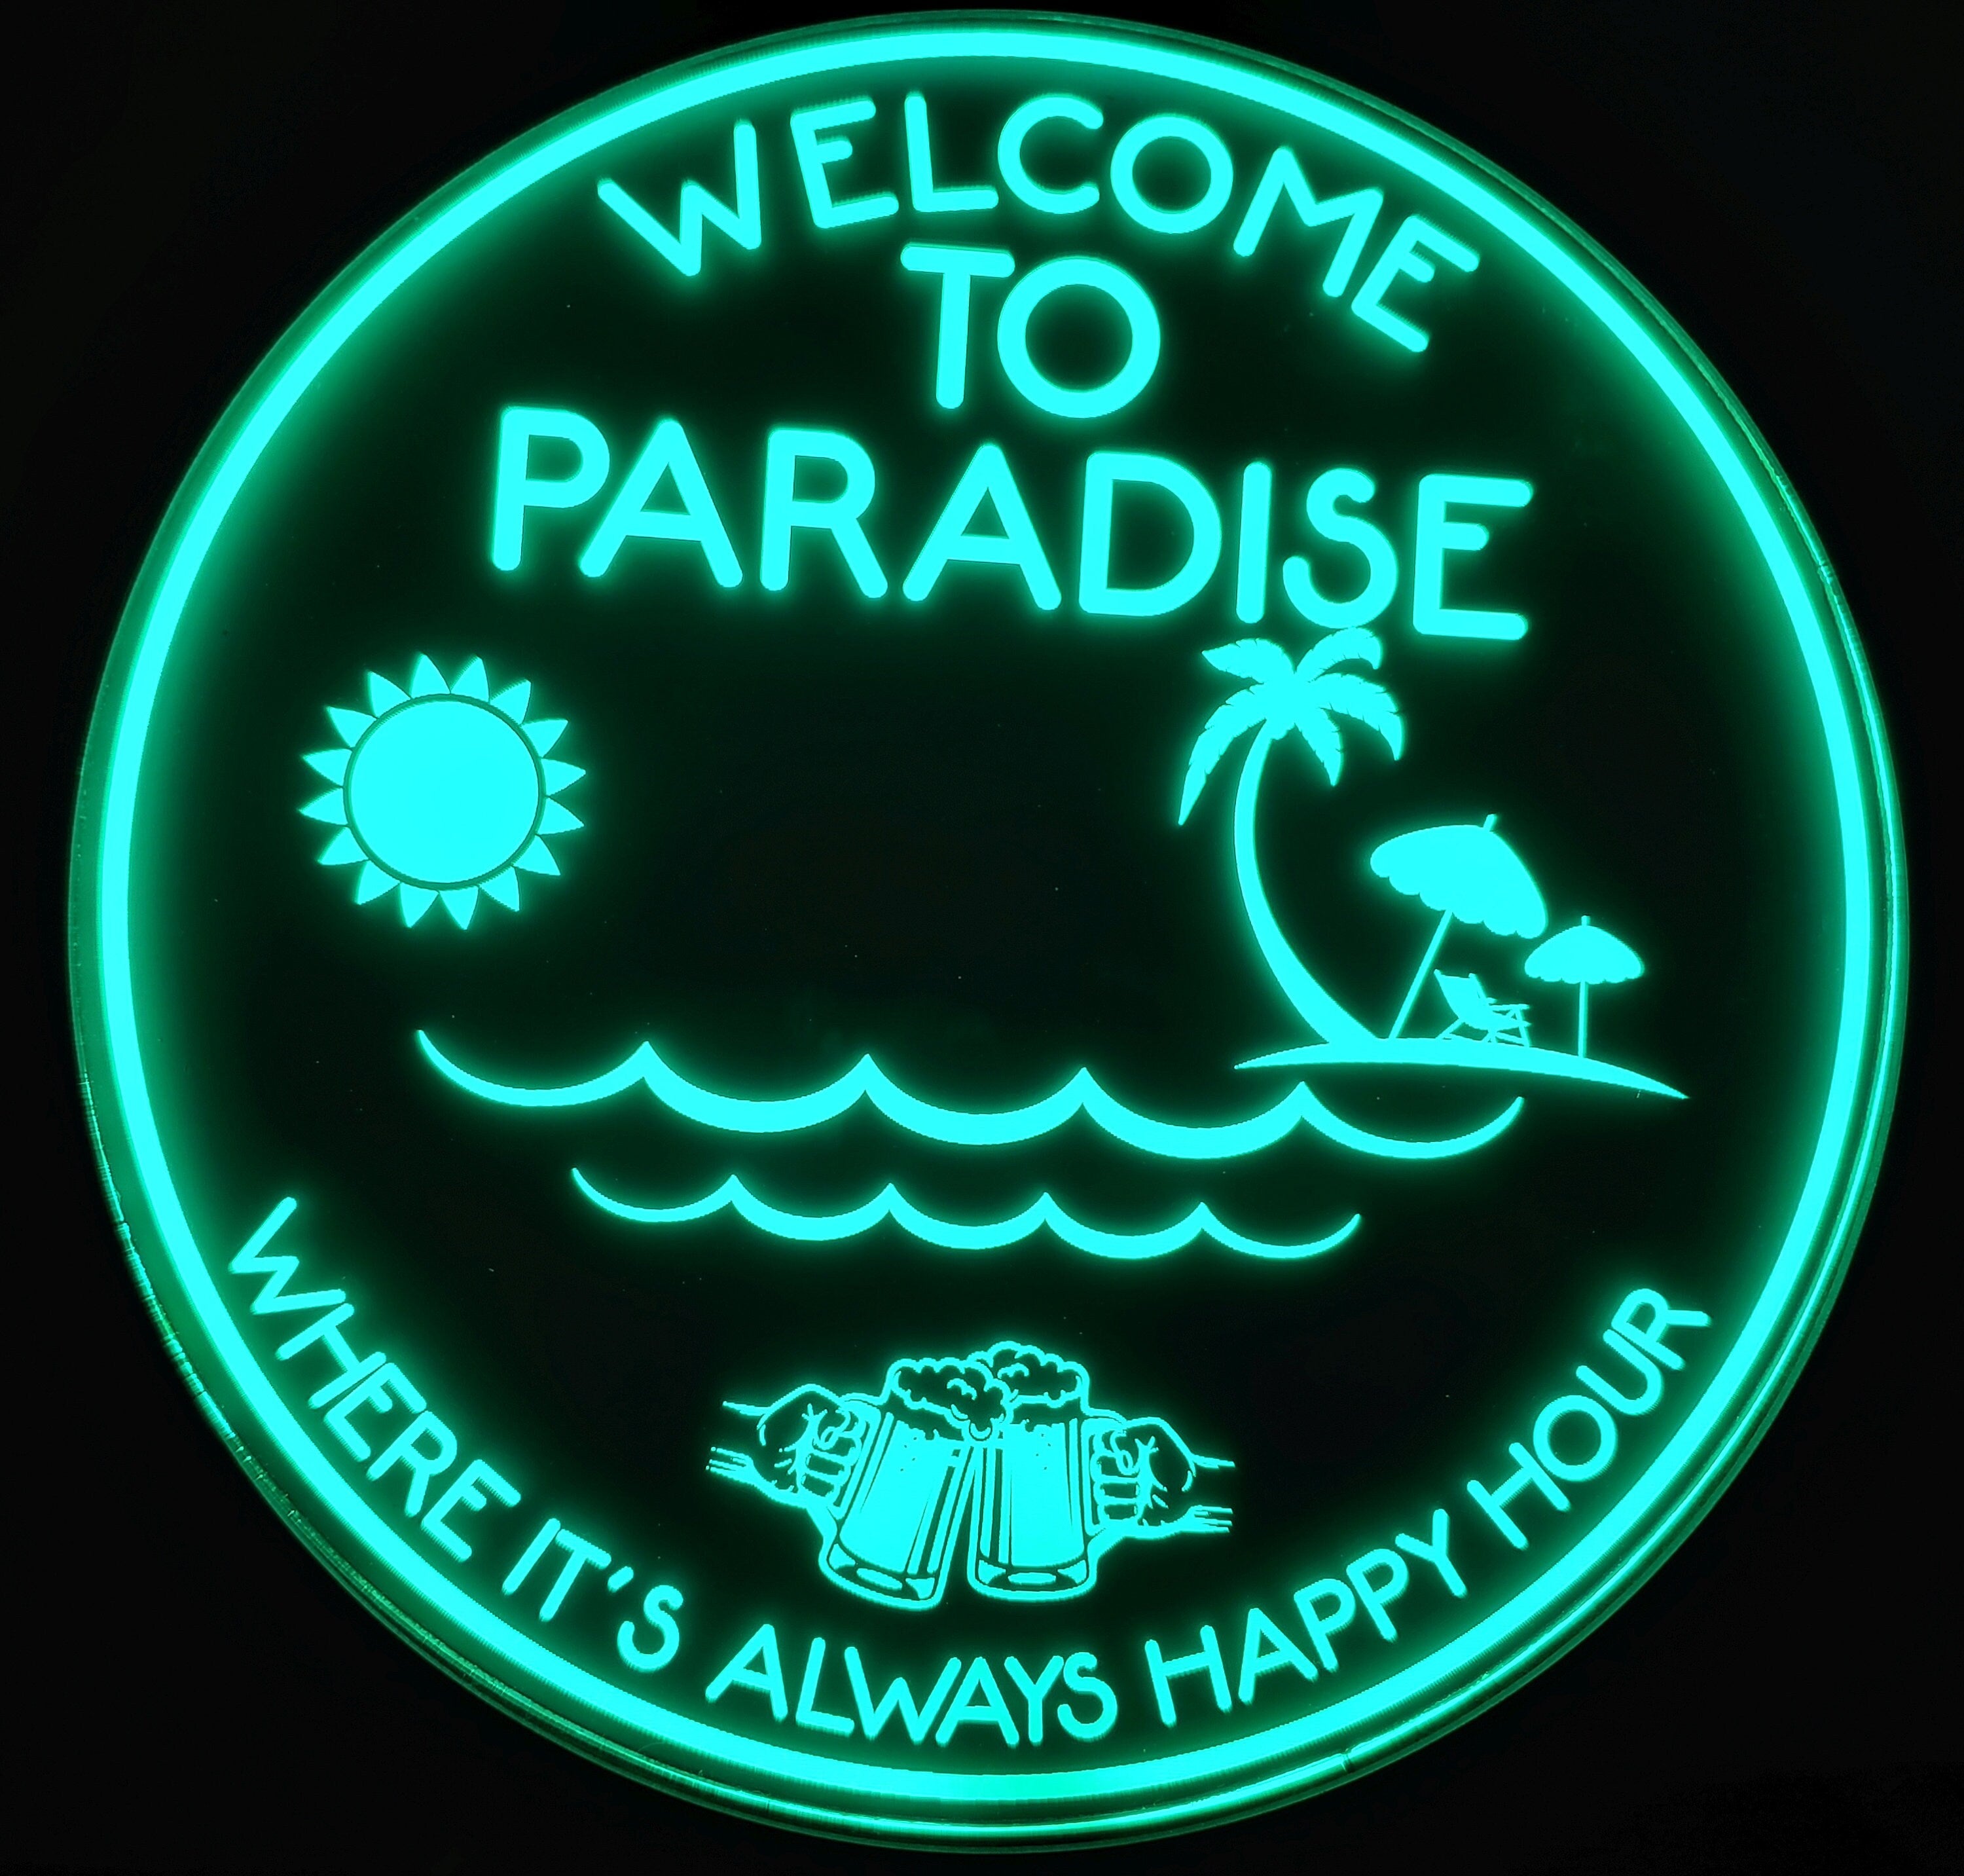 Welcome to Paradise Sign LED Wall Sign Neon Like - Color Changing Remote Control - 5 Sizes Made in USA Free Shipping